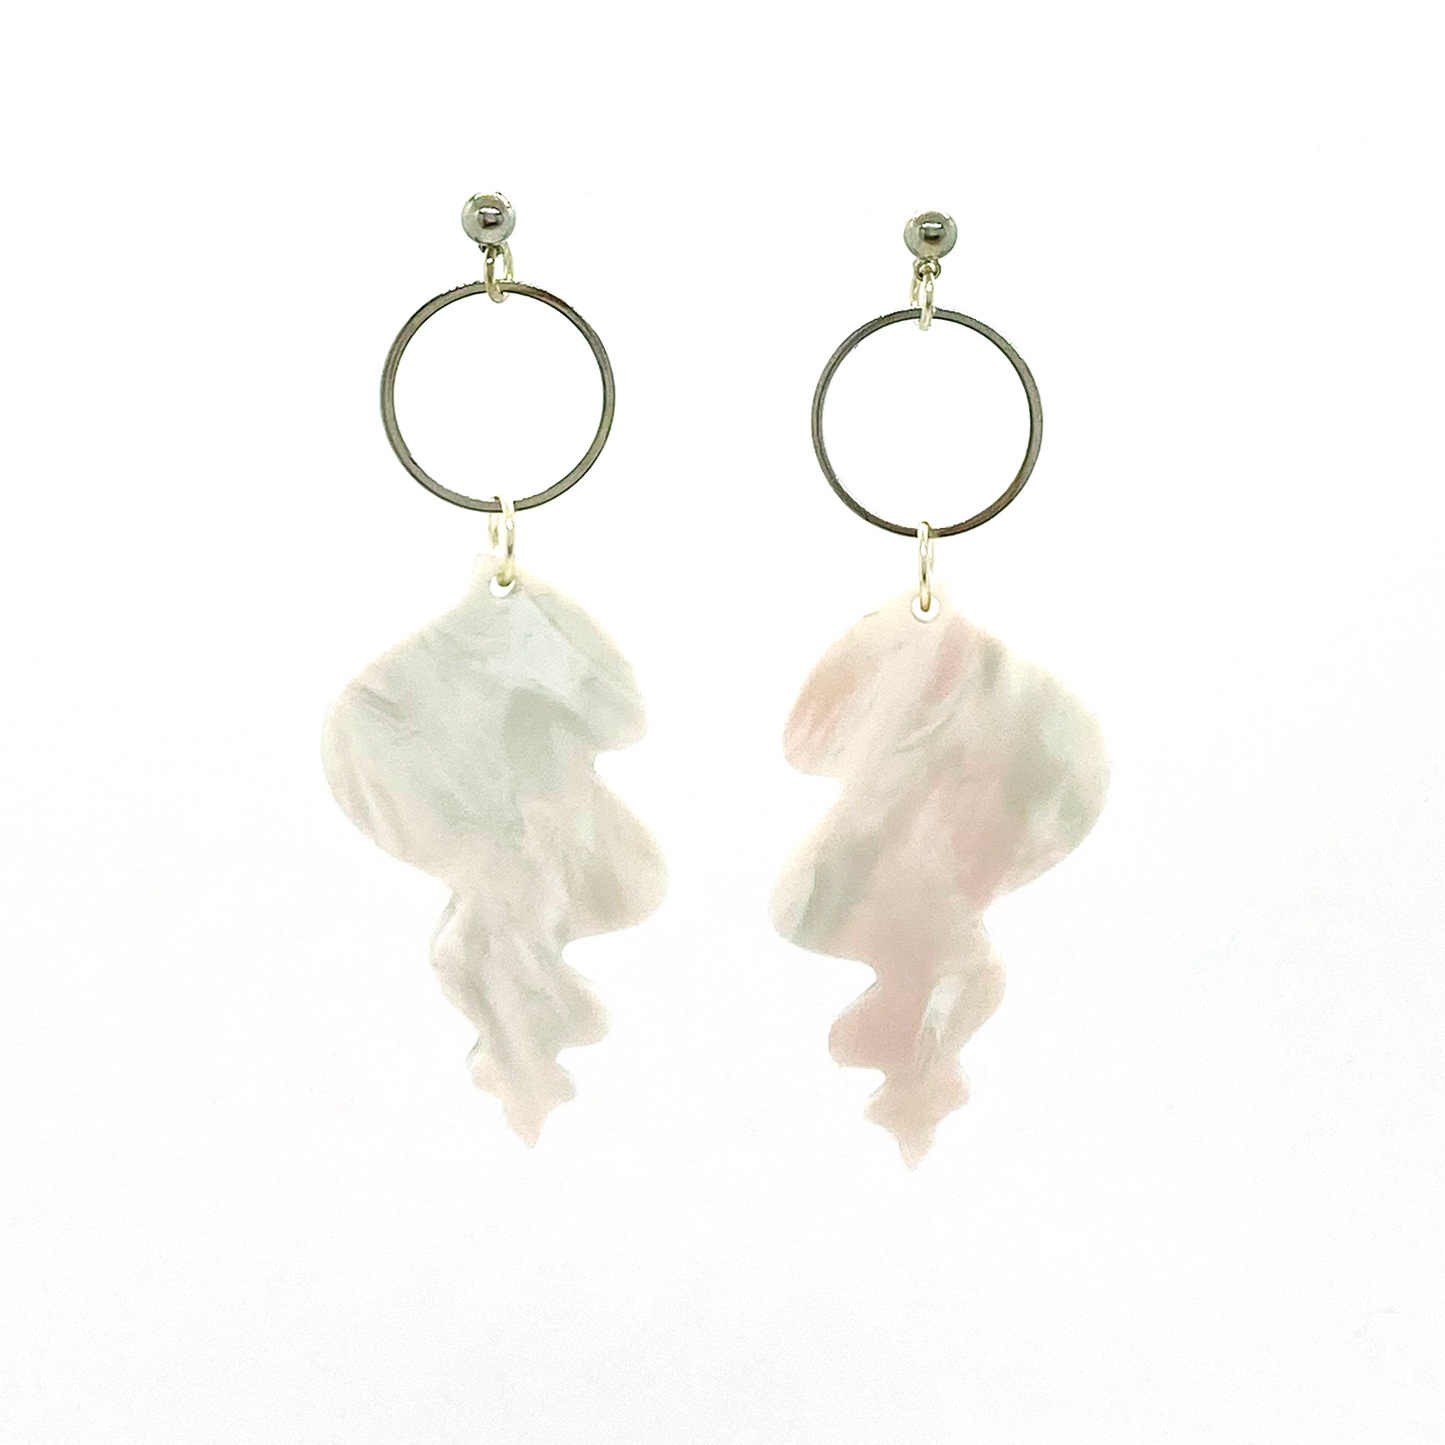 Abstract Shell Earrings- Grey & Pale Pink Marble